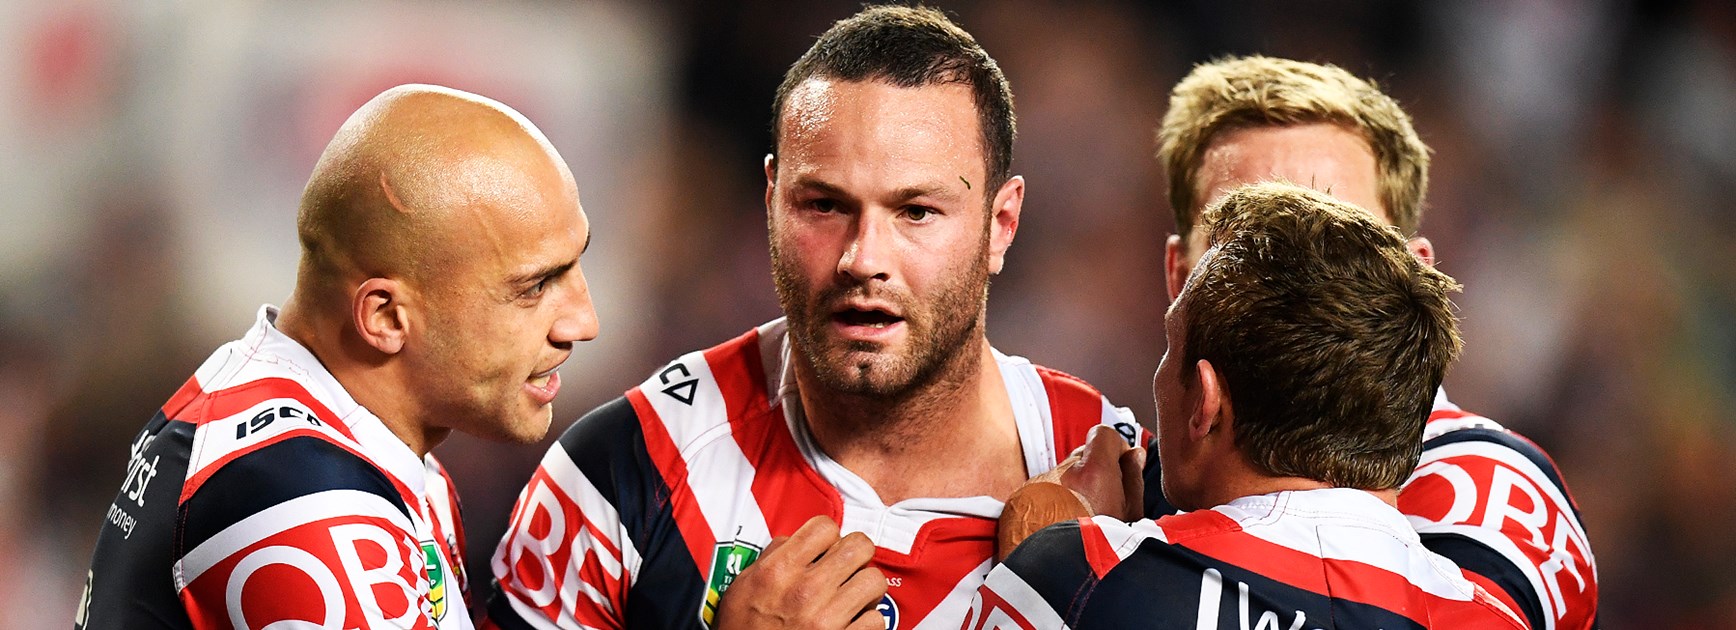 2018 NRL Fantasy guide: Roosters